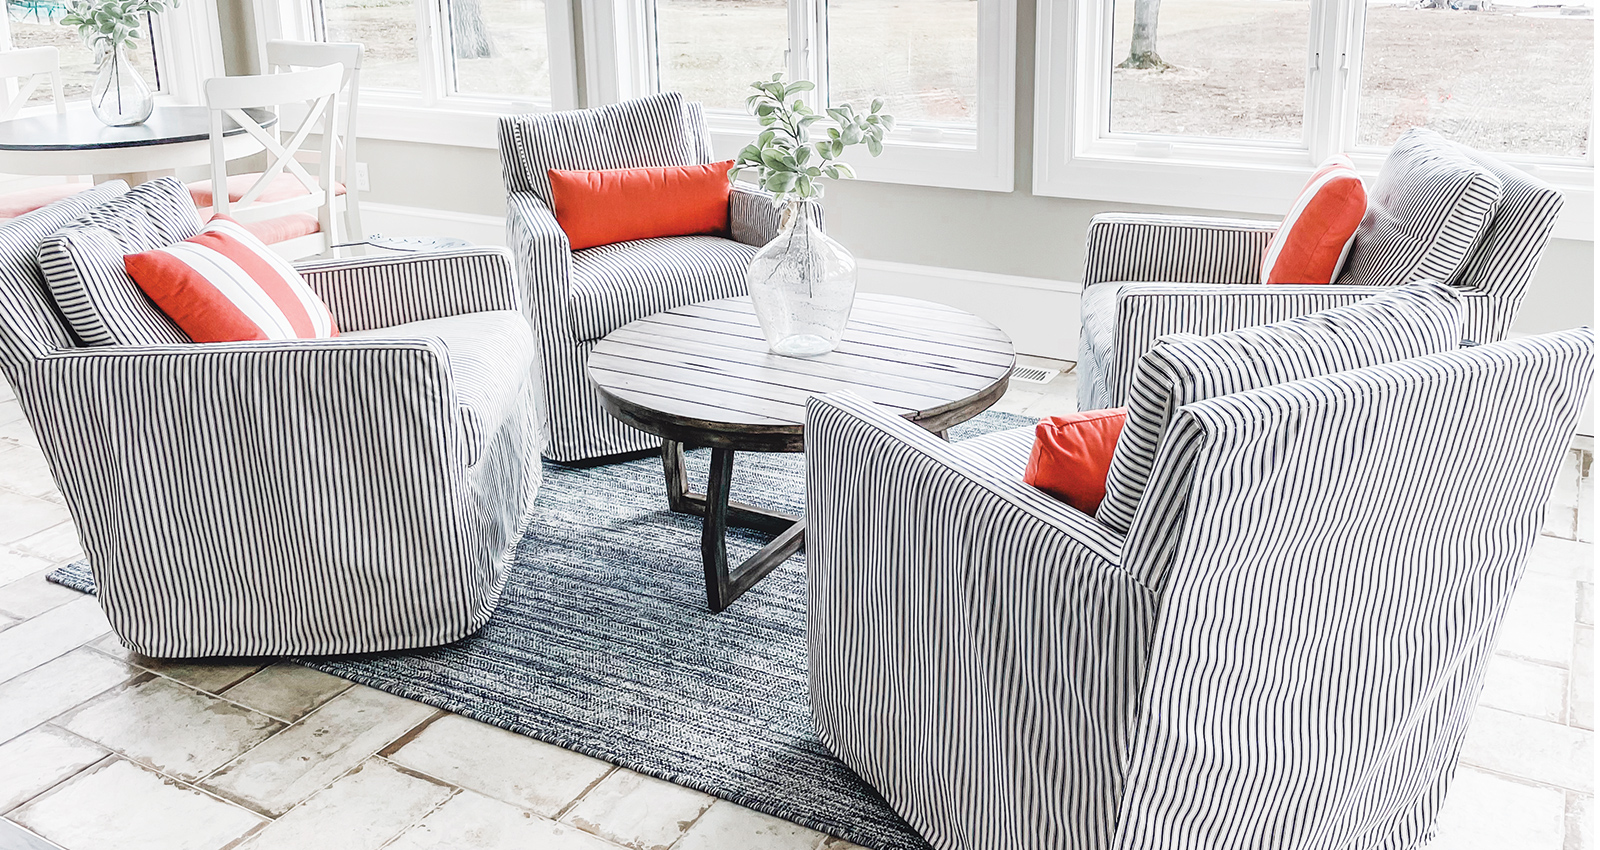 Four comfortable white and navy striped chairs around a circular coffee table.